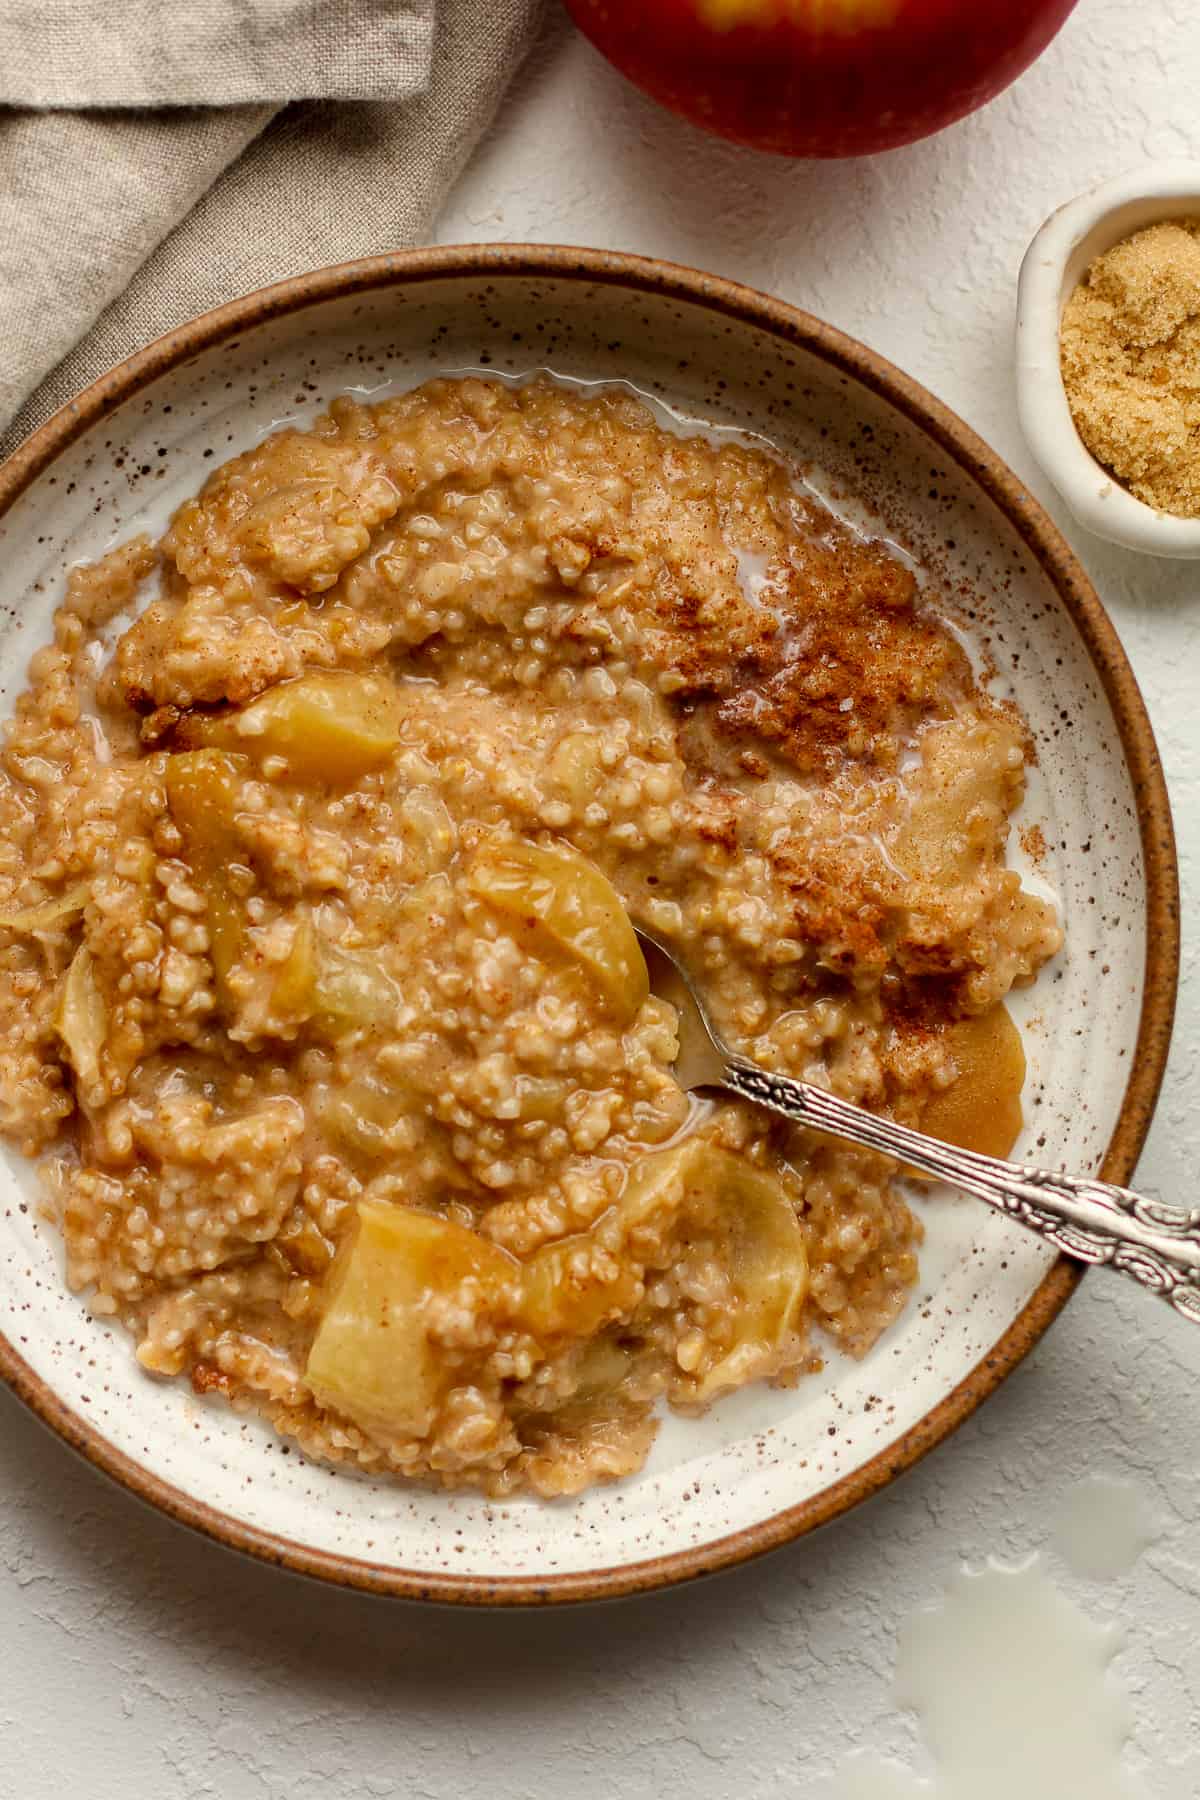 Closeup on a bowl of creamy steak cut oats with apples.